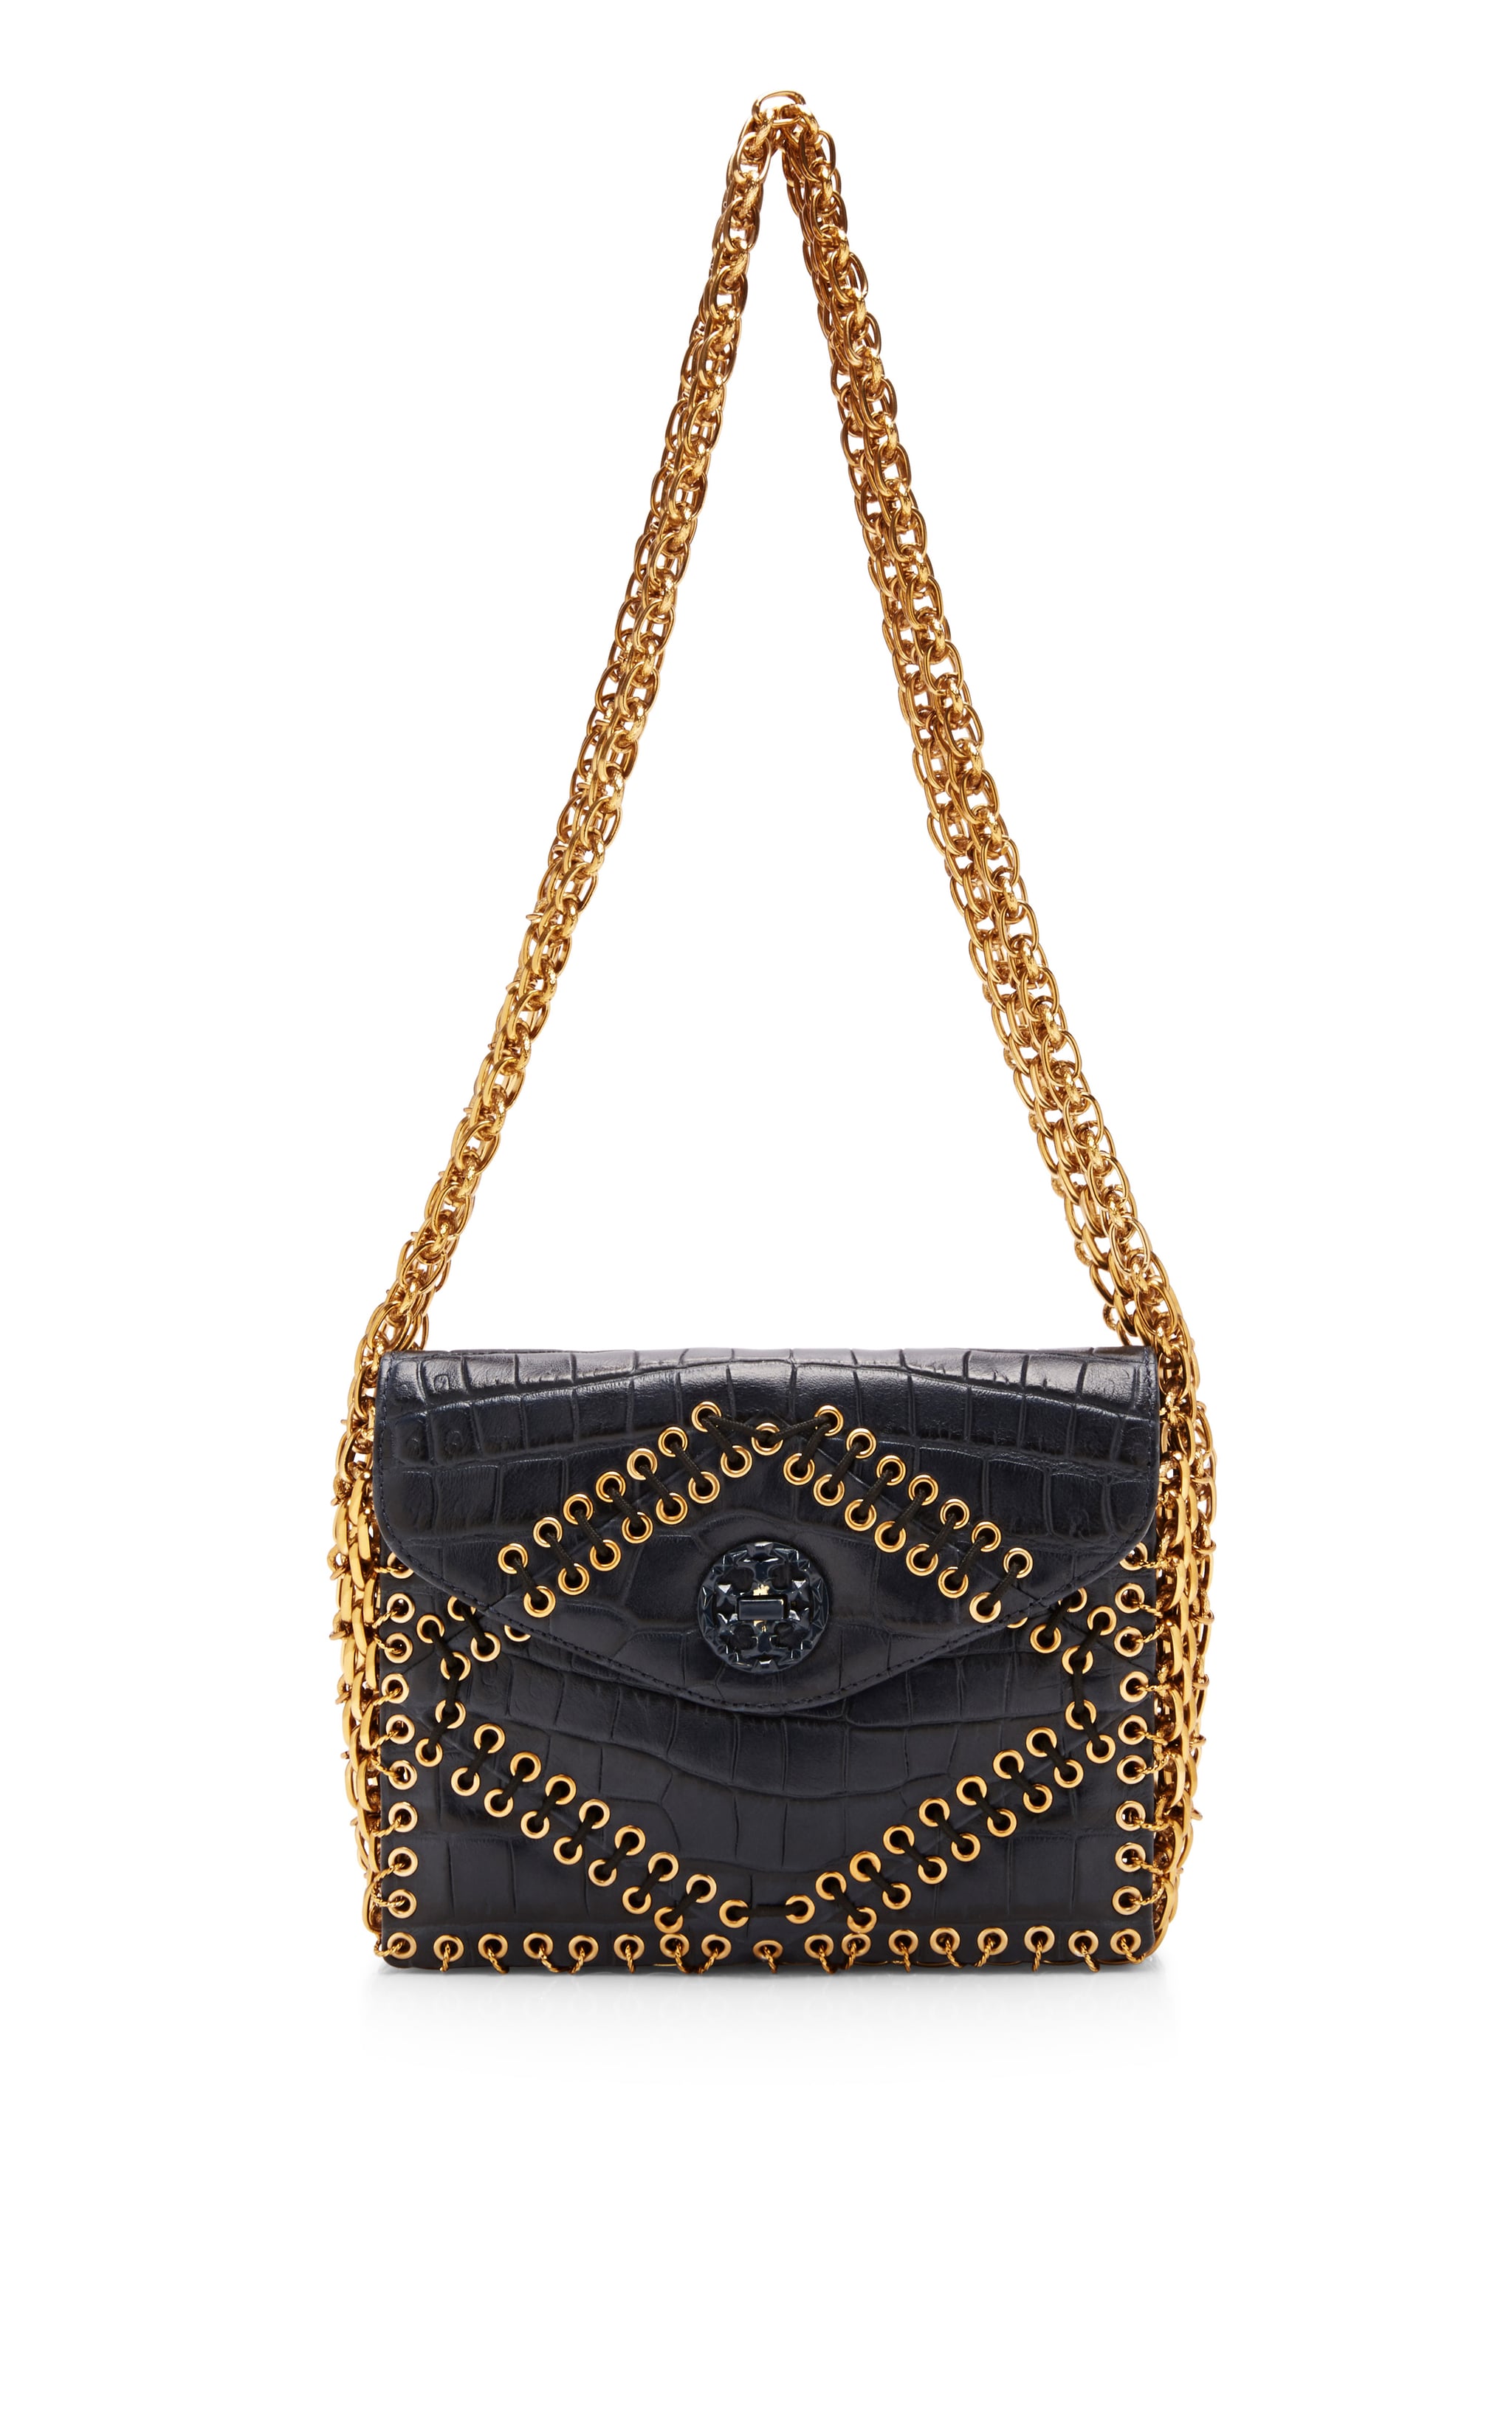 Tory Burch Fall 2014 Bags | Pay Half Now, Half Later For Tory Burch's  Latest (and Greatest!) | POPSUGAR Fashion Photo 3